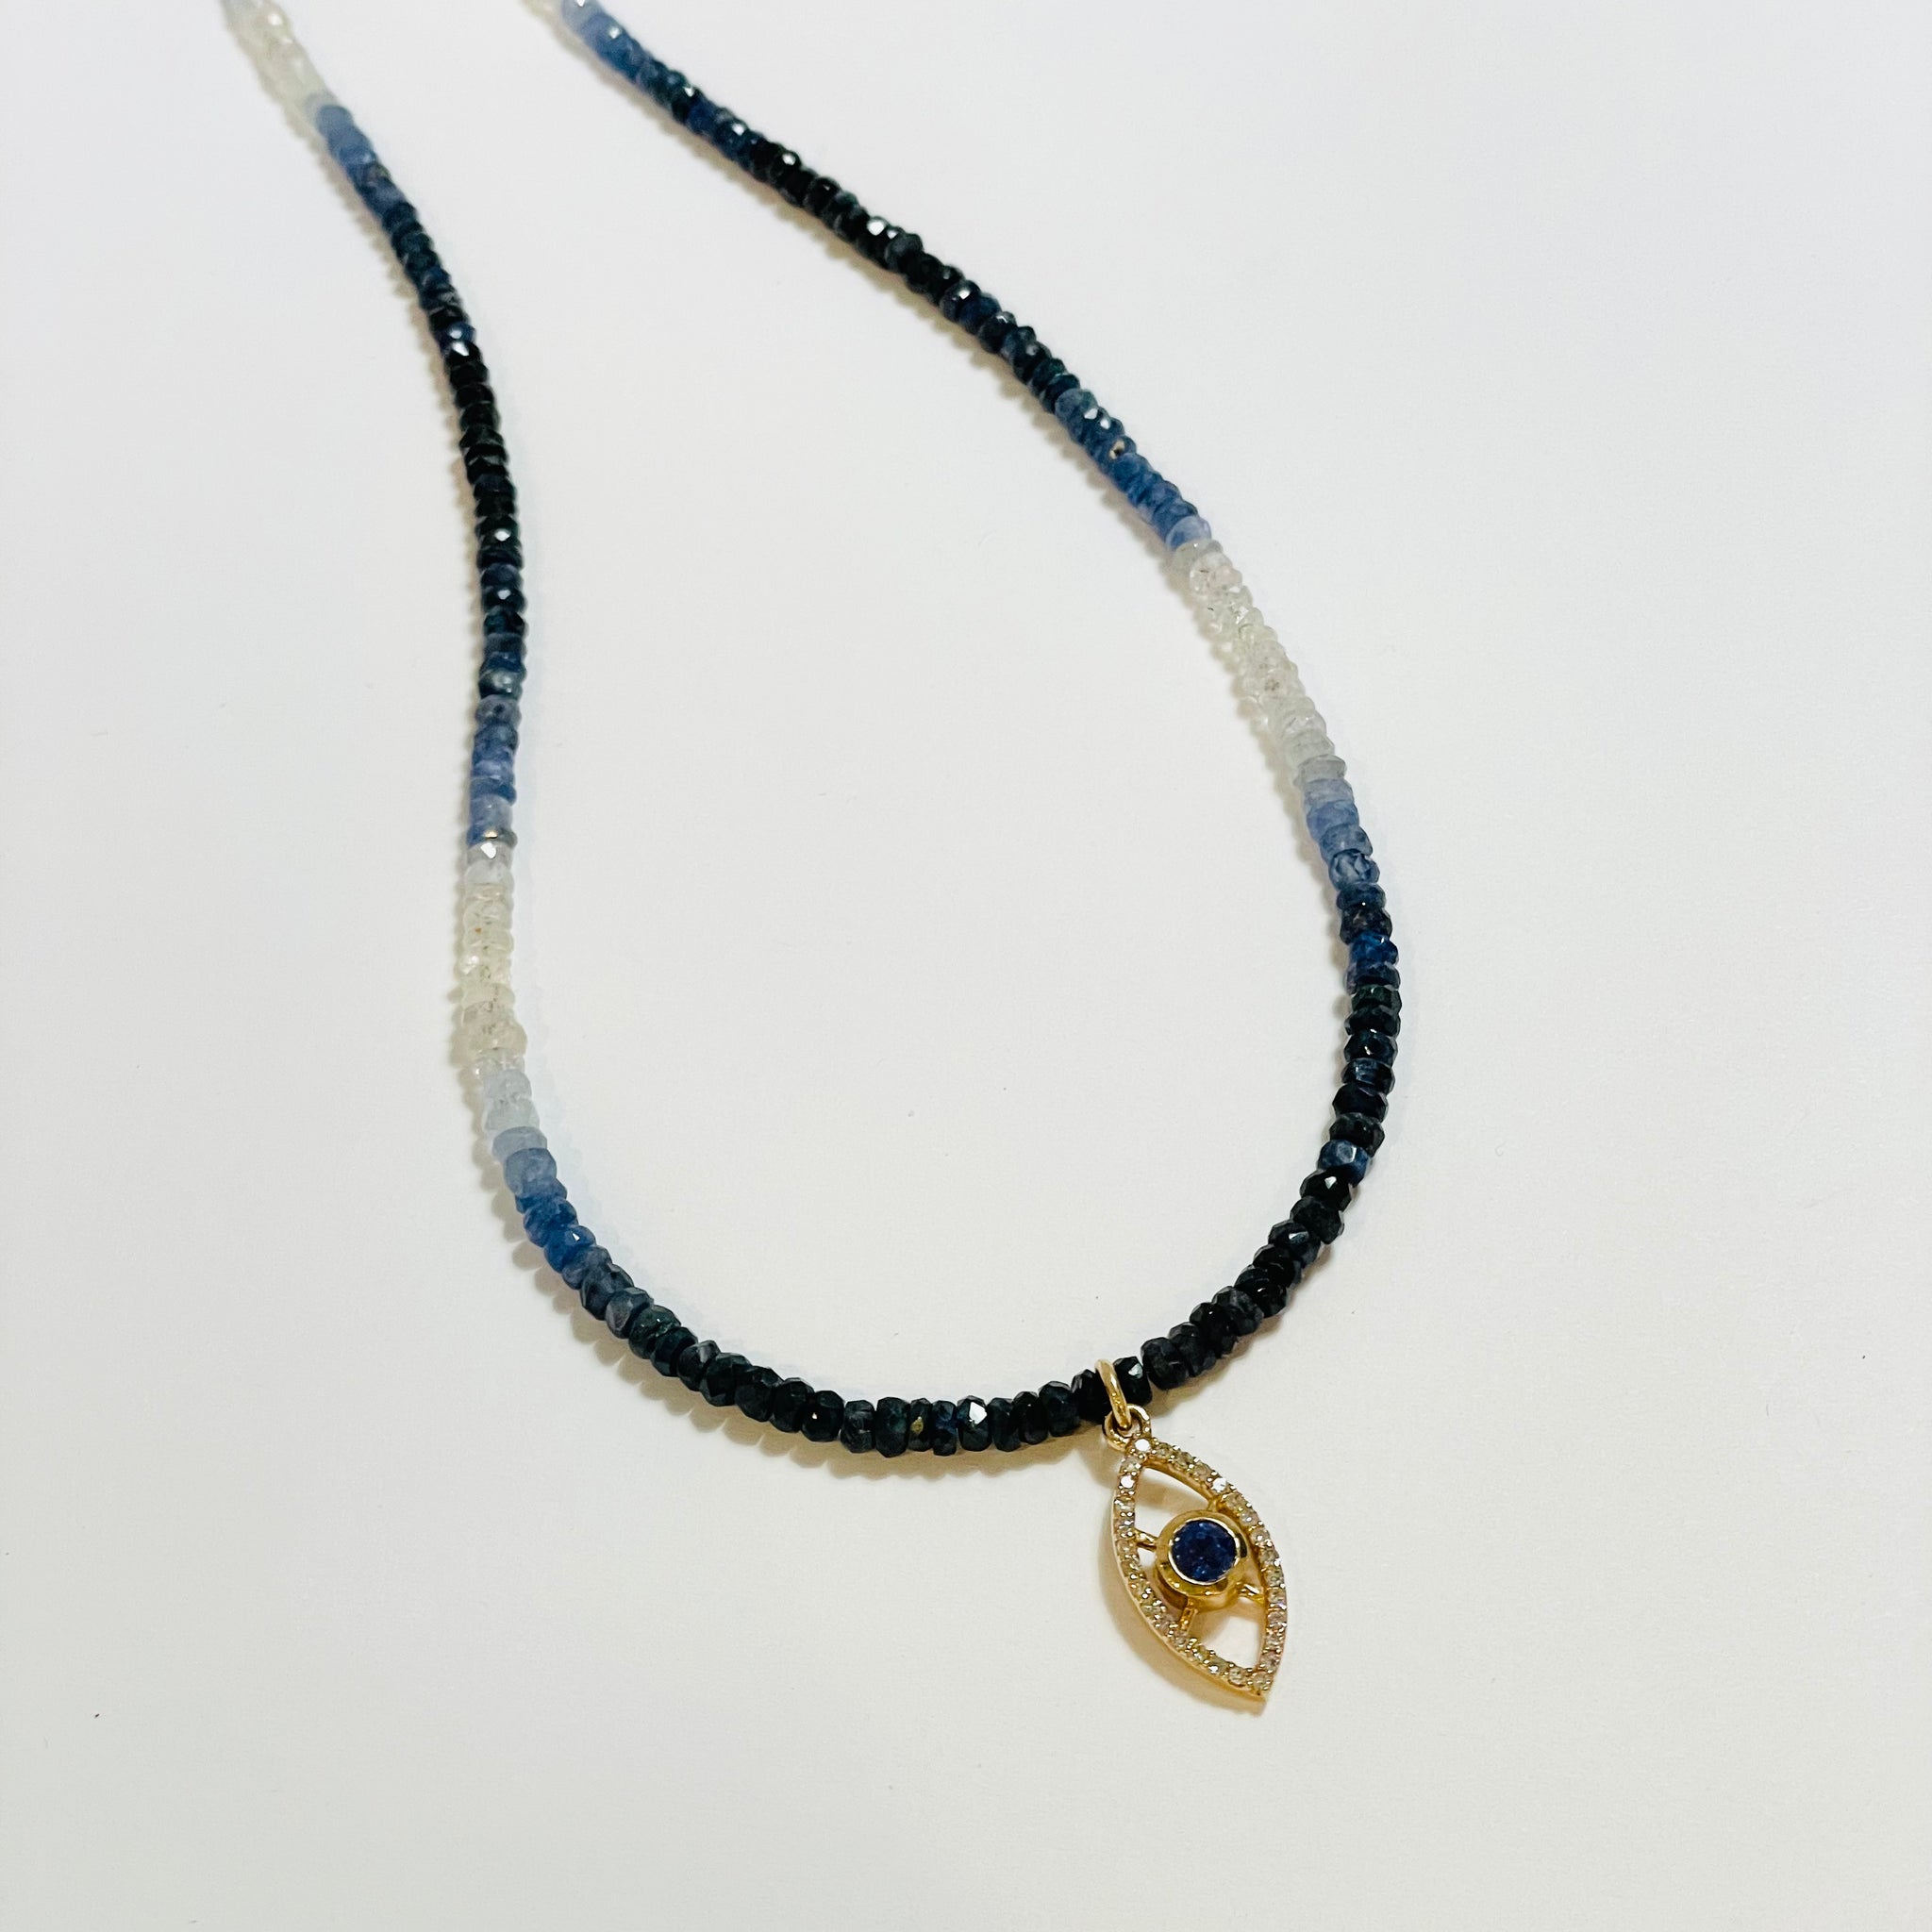 shaded blue sapphire necklace with diamond evil eye charm